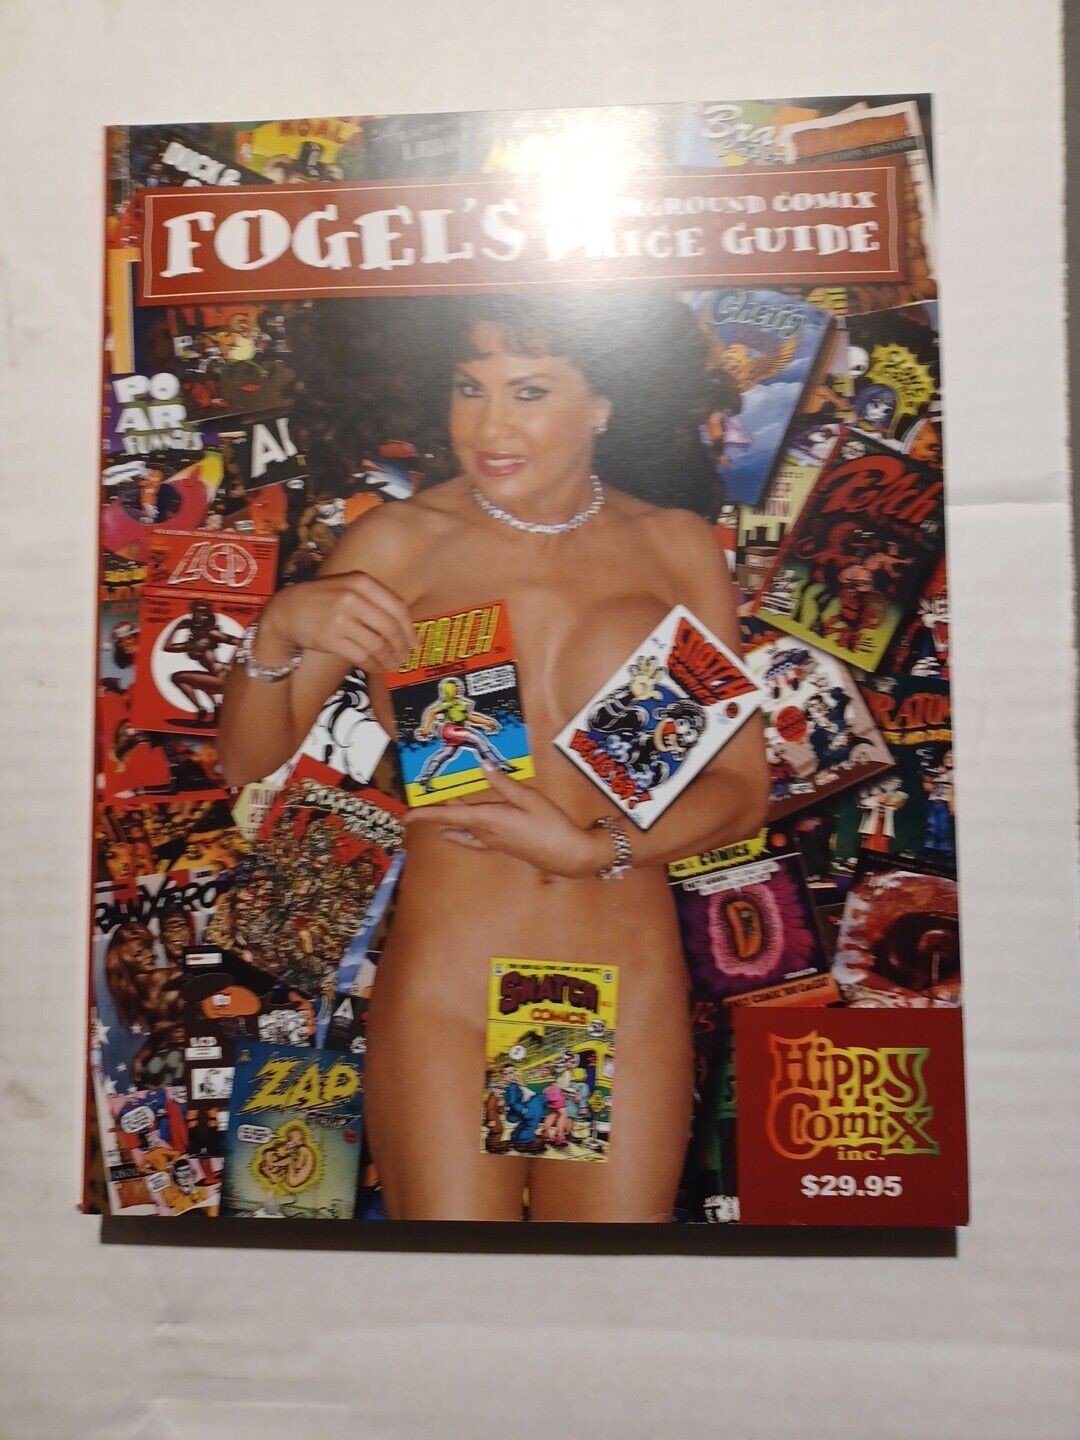 Fogel\'s Underground Comix Price Guide SC 1st Edition #1-1ST VF CONDITION 2006